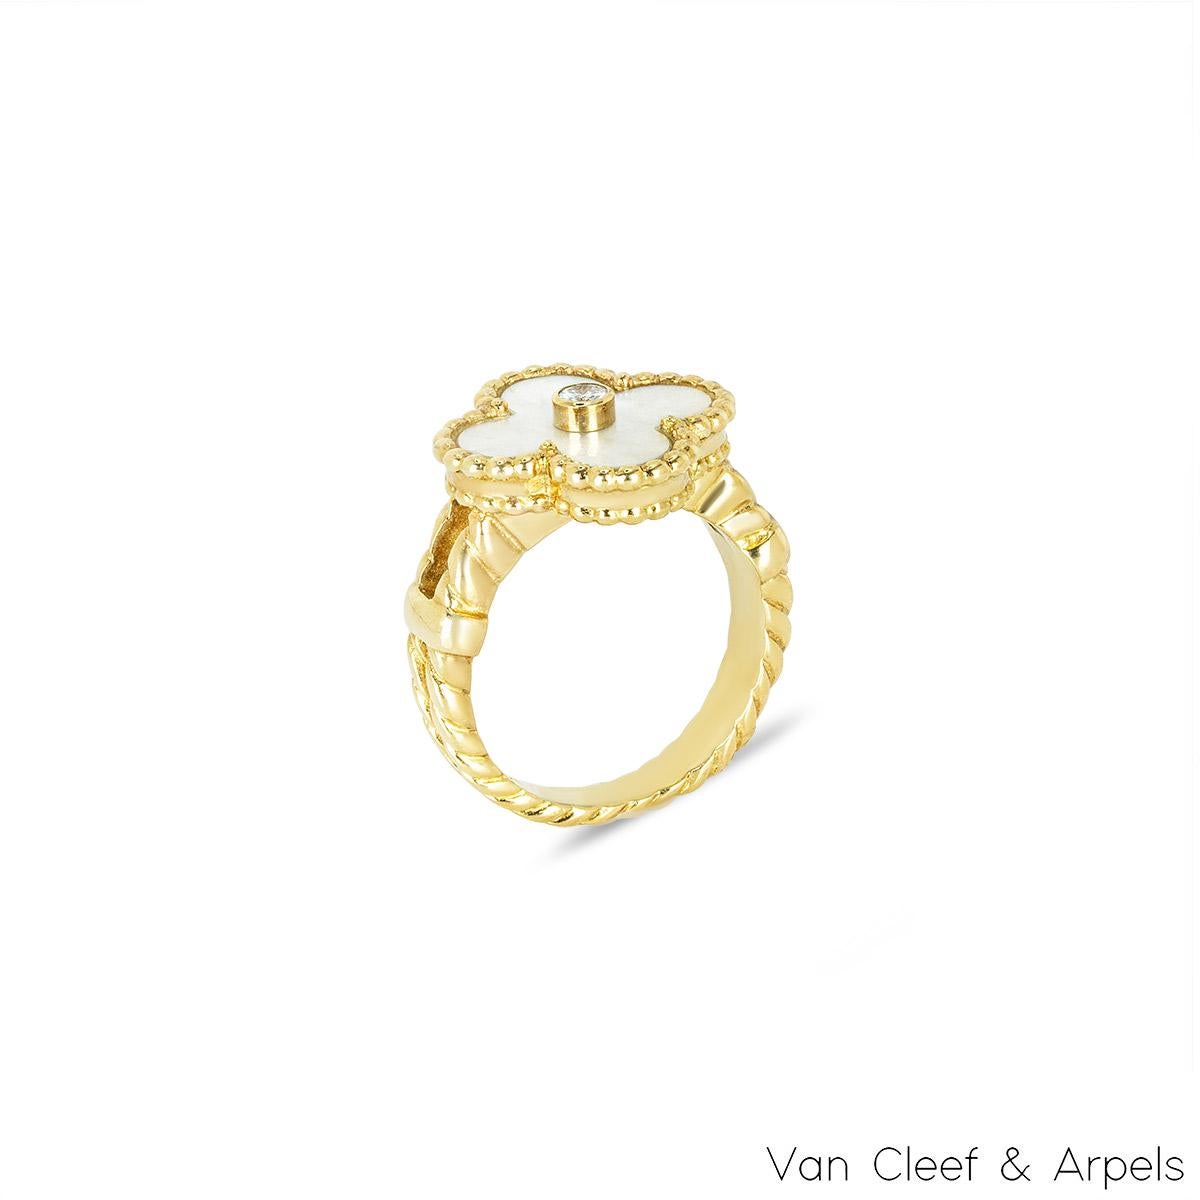 A beautiful 18k yellow gold Van Cleef & Arpels ring from the Alhambra collection. The ring is composed of a four leaf clover motif with a mother of pearl inlay, complimented by a beaded edge and a round brilliant cut diamond weighing approximately